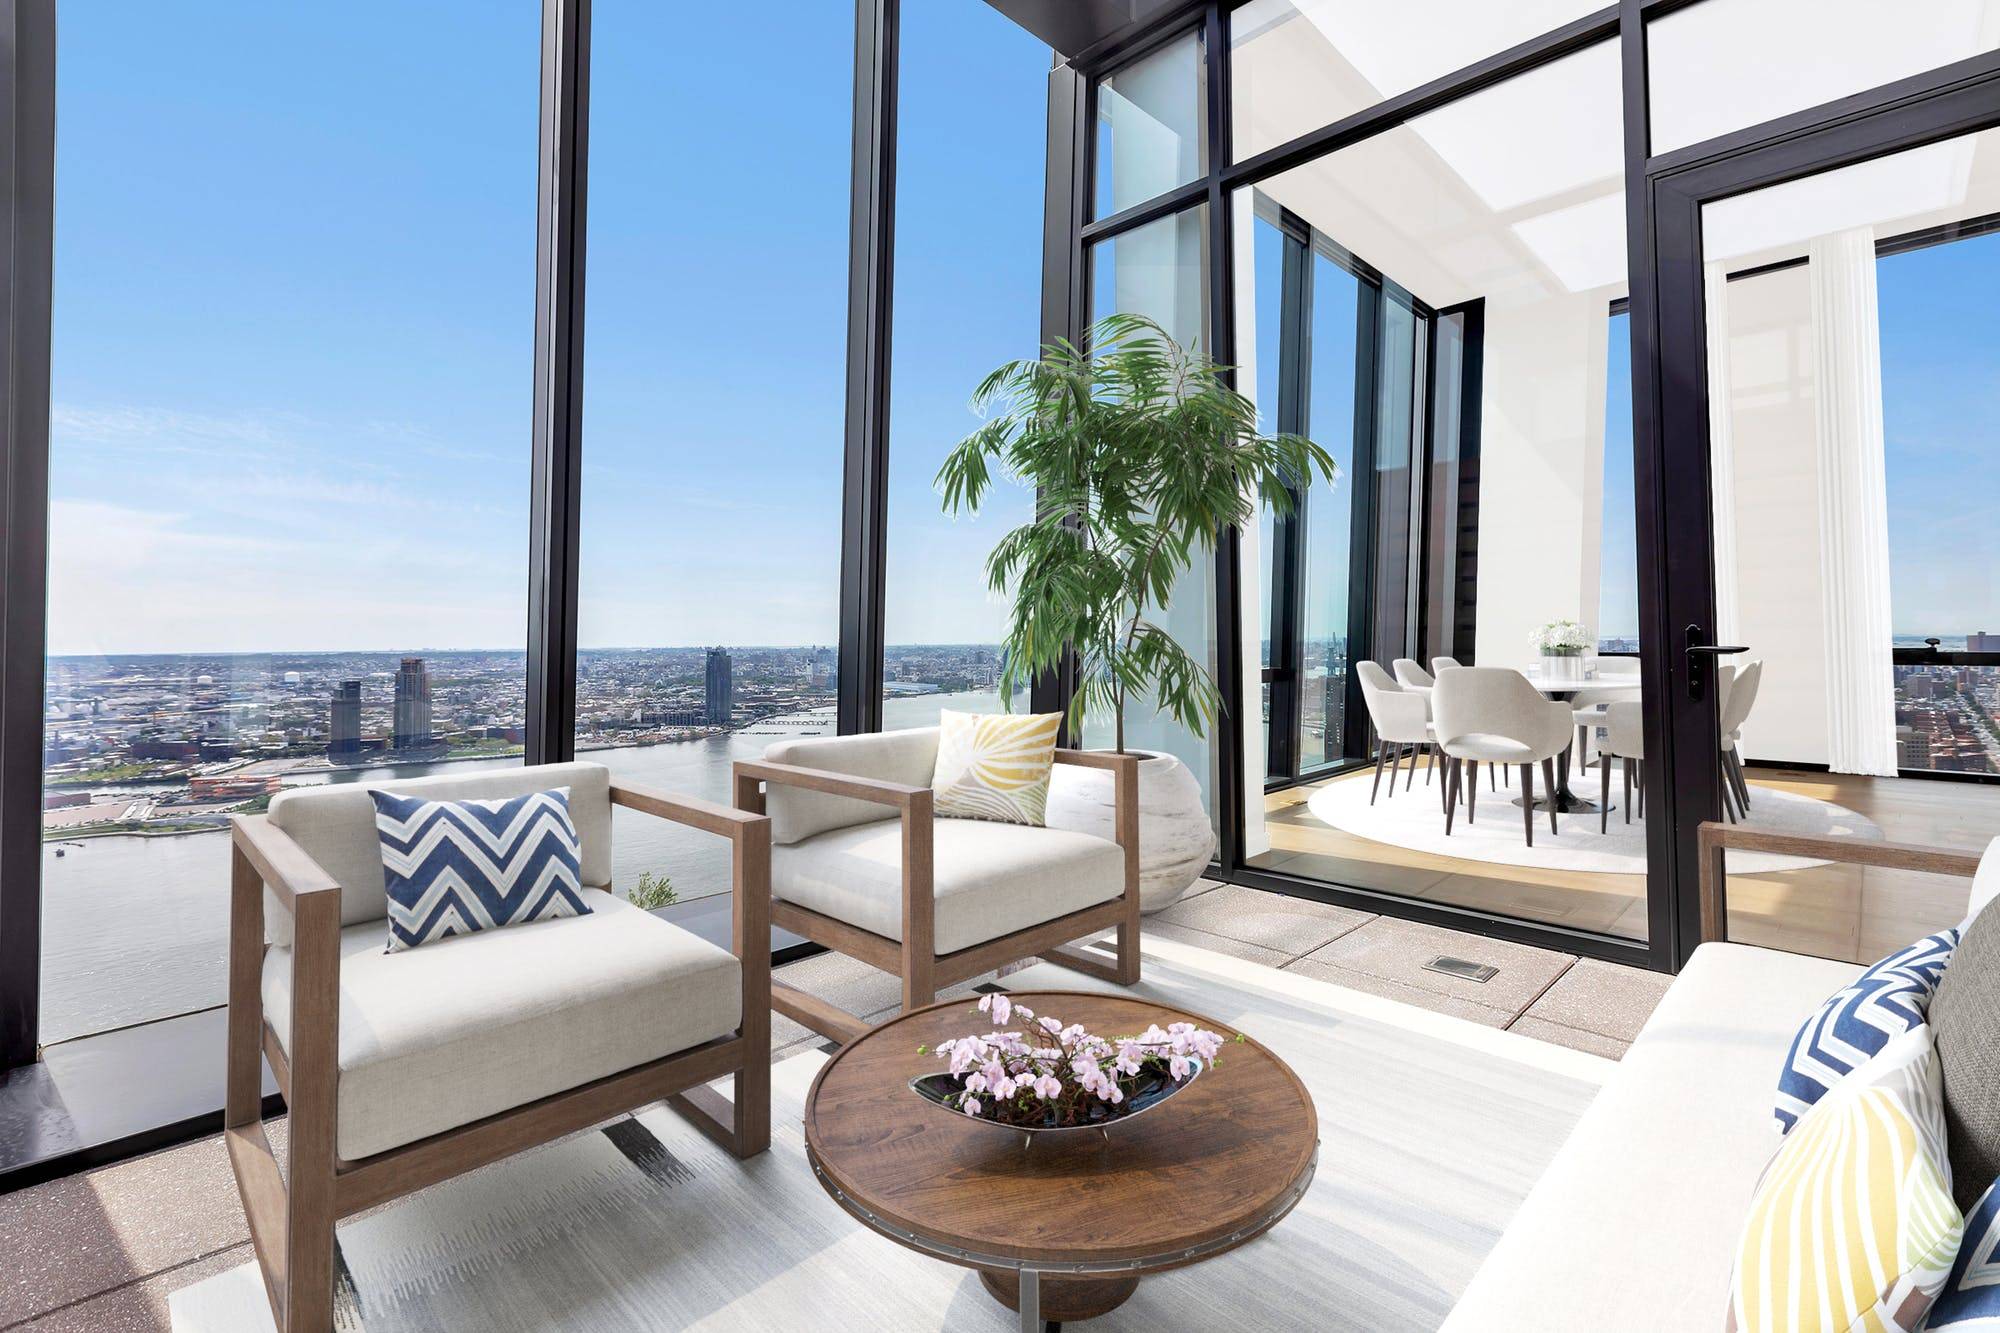 No Fee + A Private Rooftop Pool = Luxury 3BR in Murray Hill